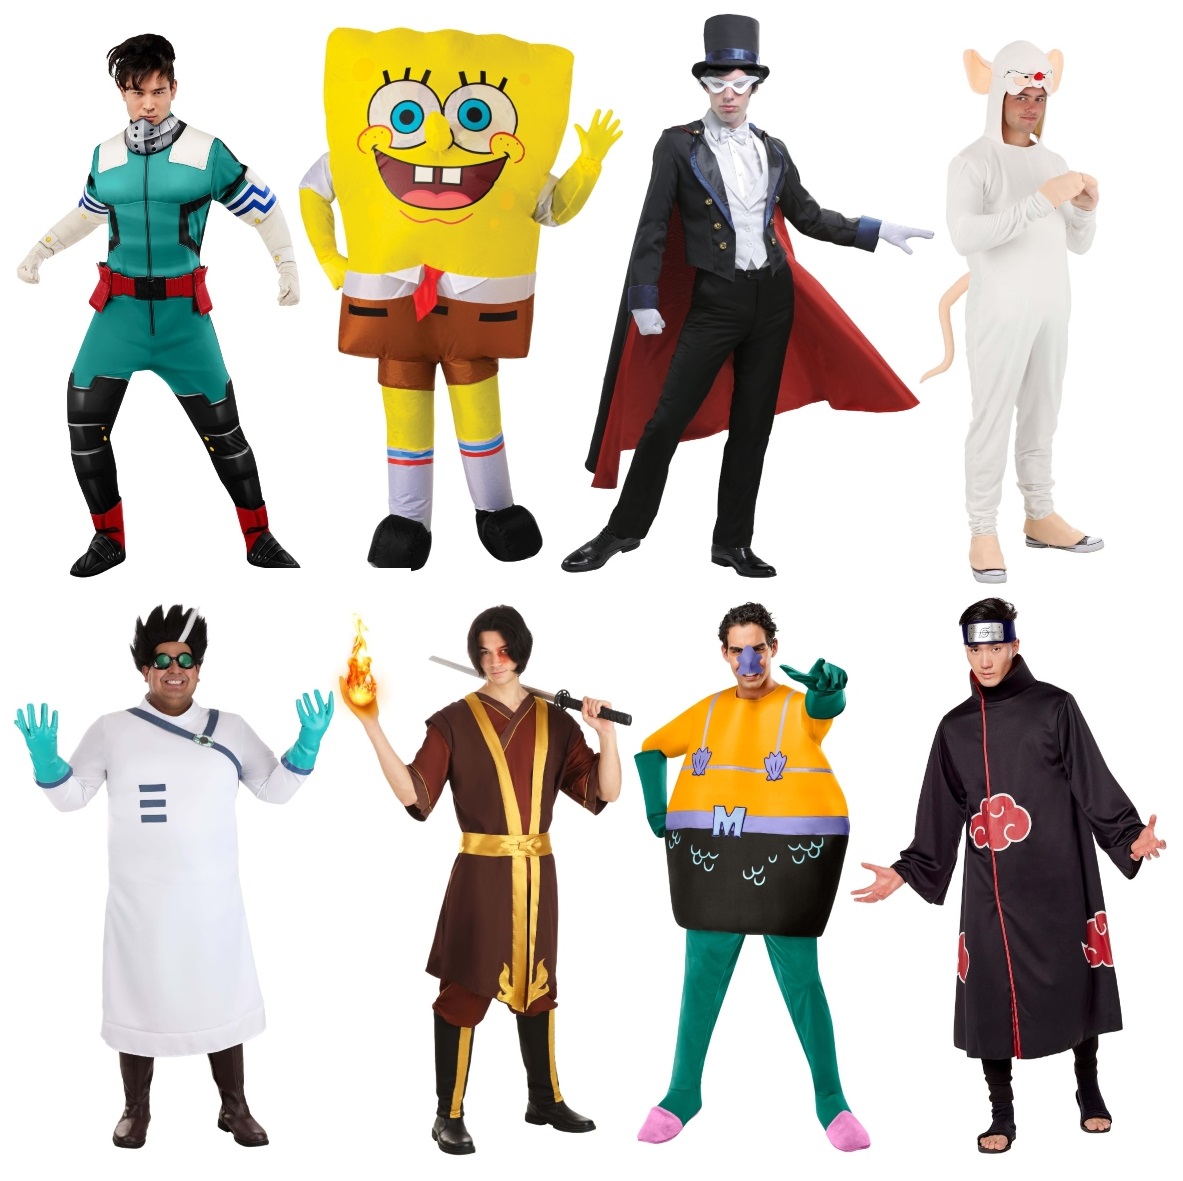 Cartoon and Anime Costumes for Men